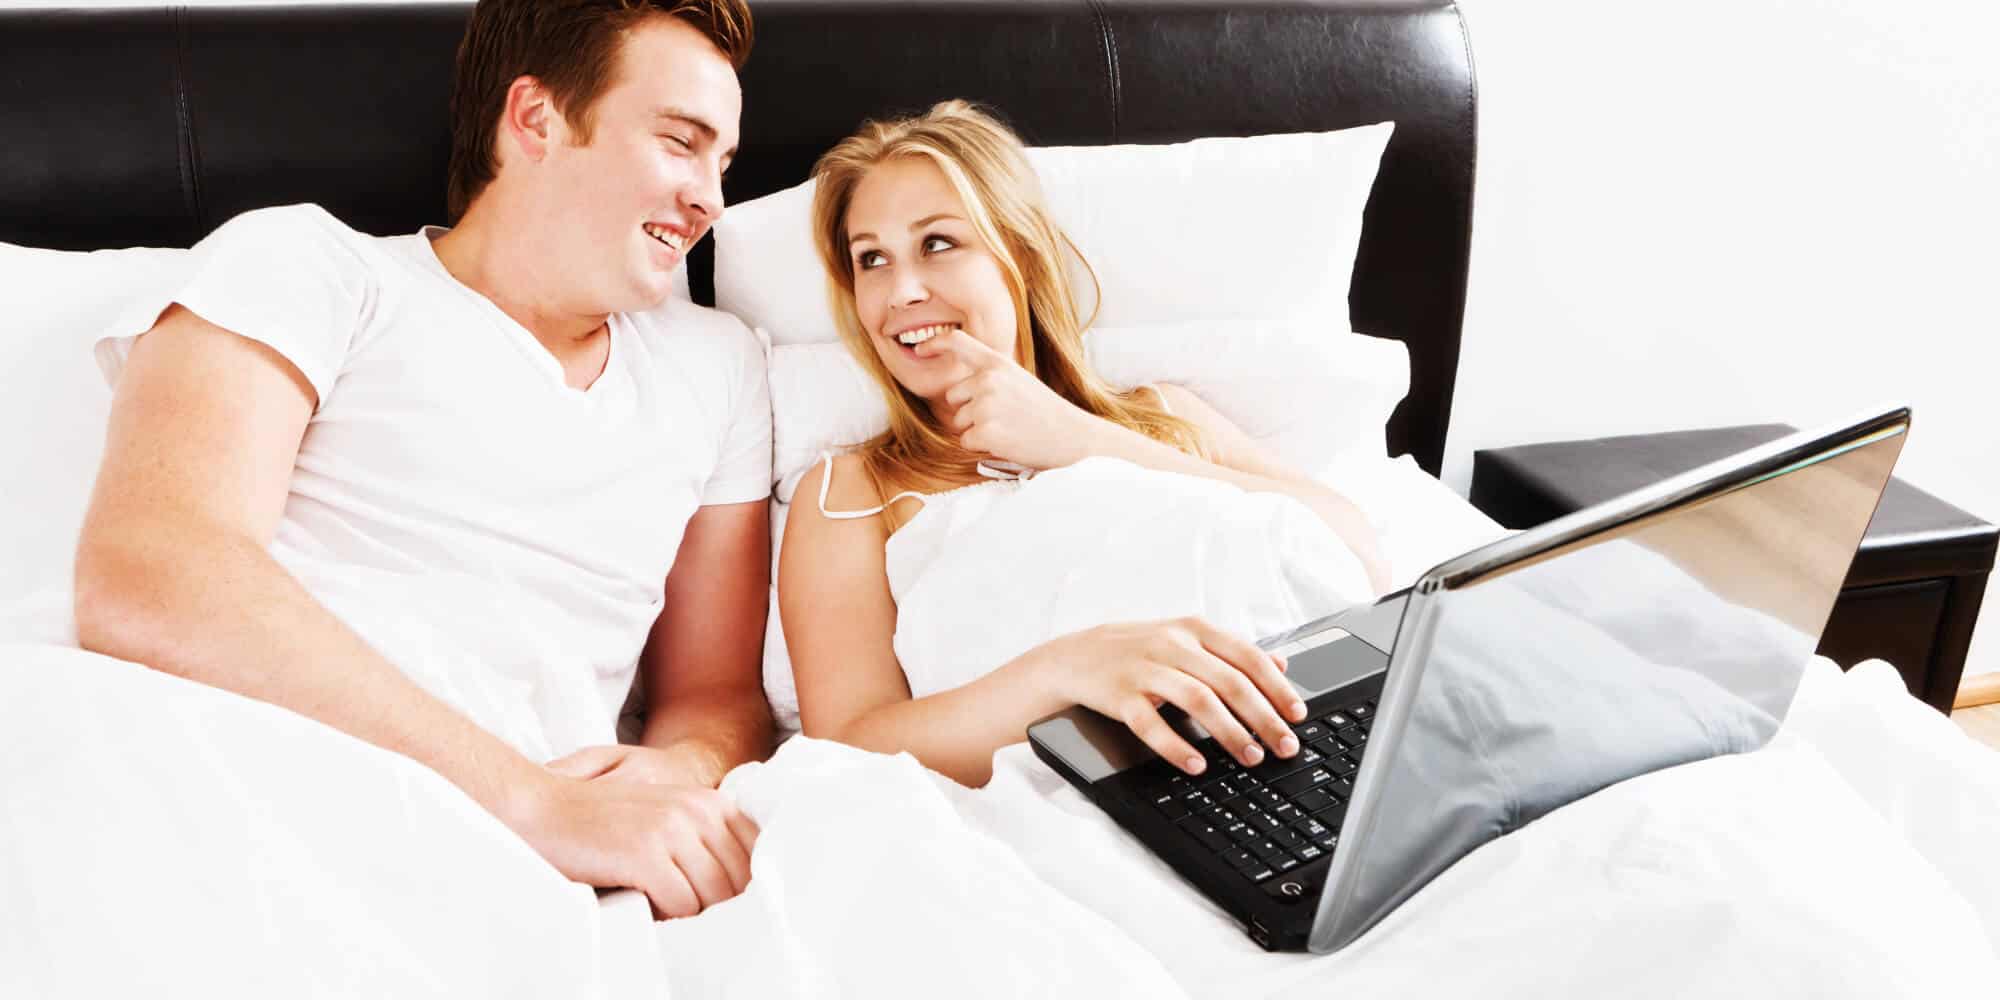 Can Porn Make a Relationship Stronger?